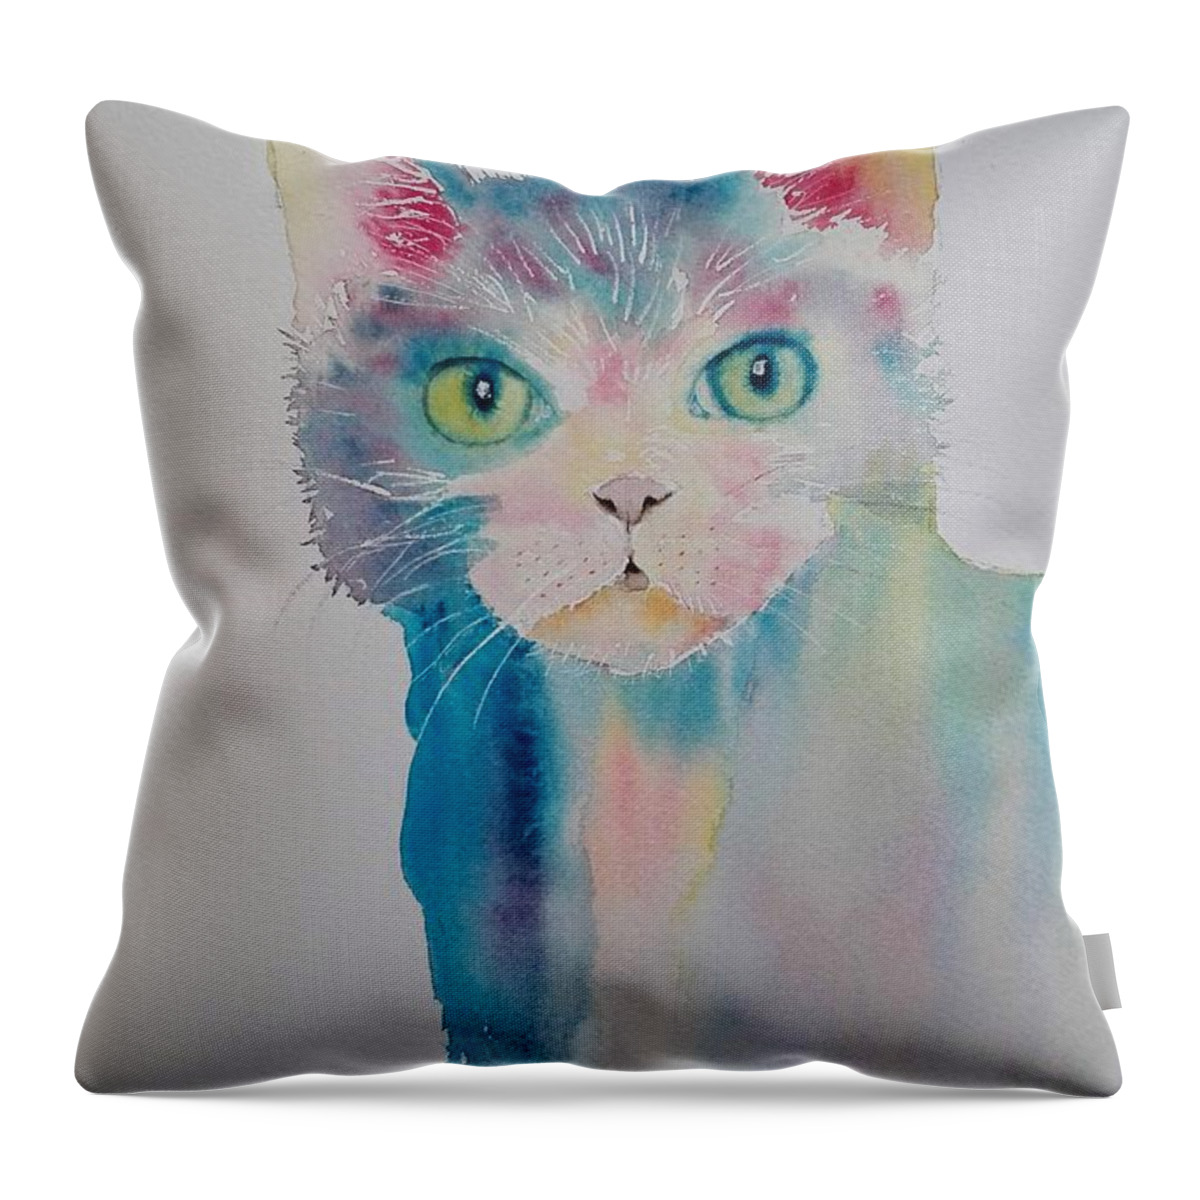 Kitten Throw Pillow featuring the painting Funky Kitten by Sandie Croft